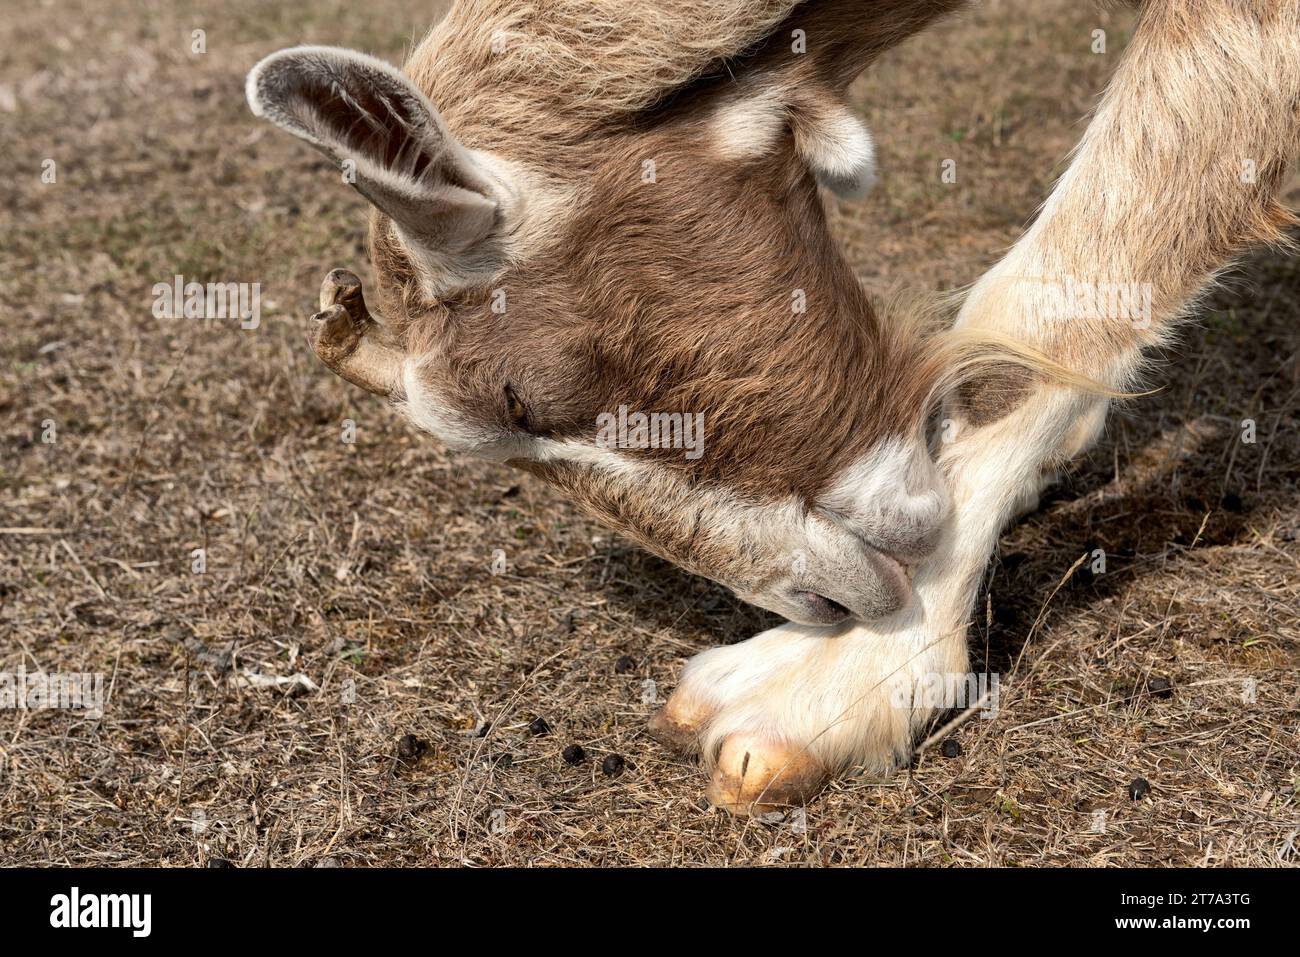 Goat scratching its paw Stock Photo